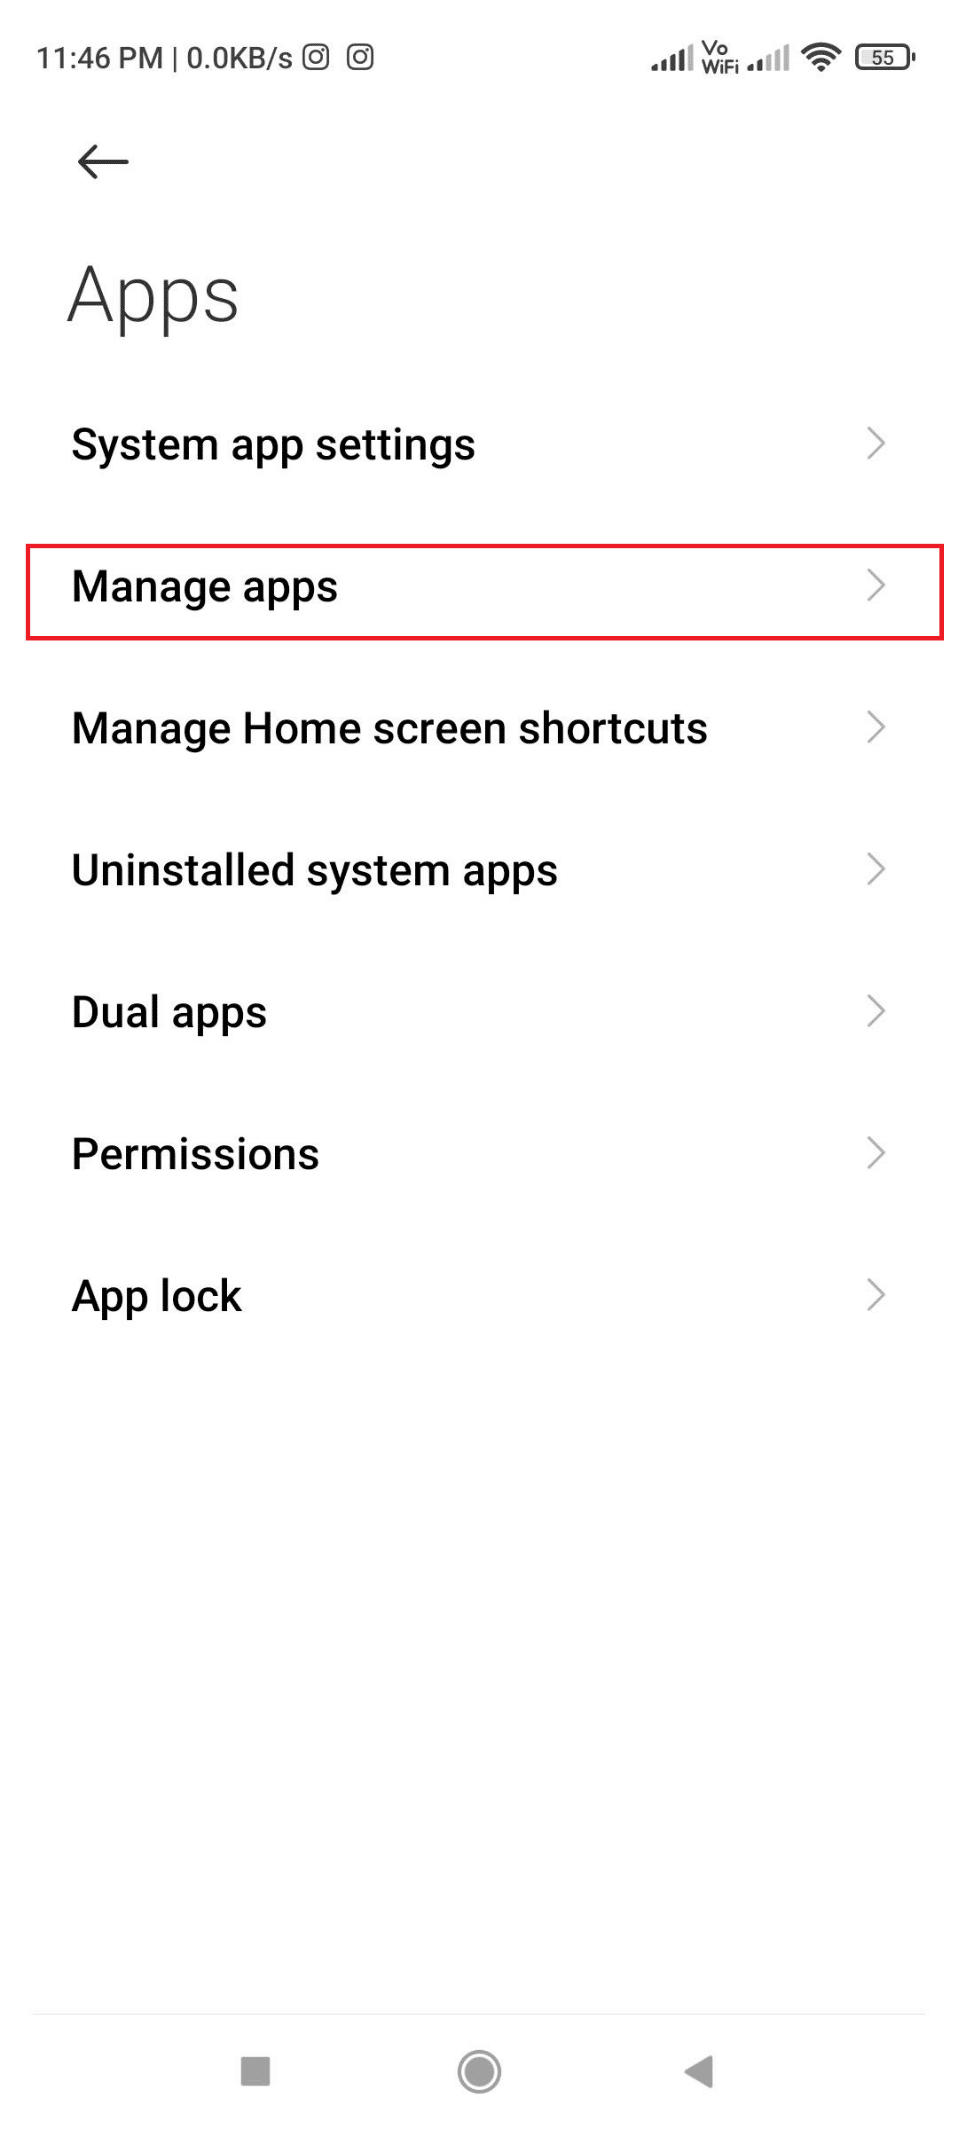 Select Manage apps.